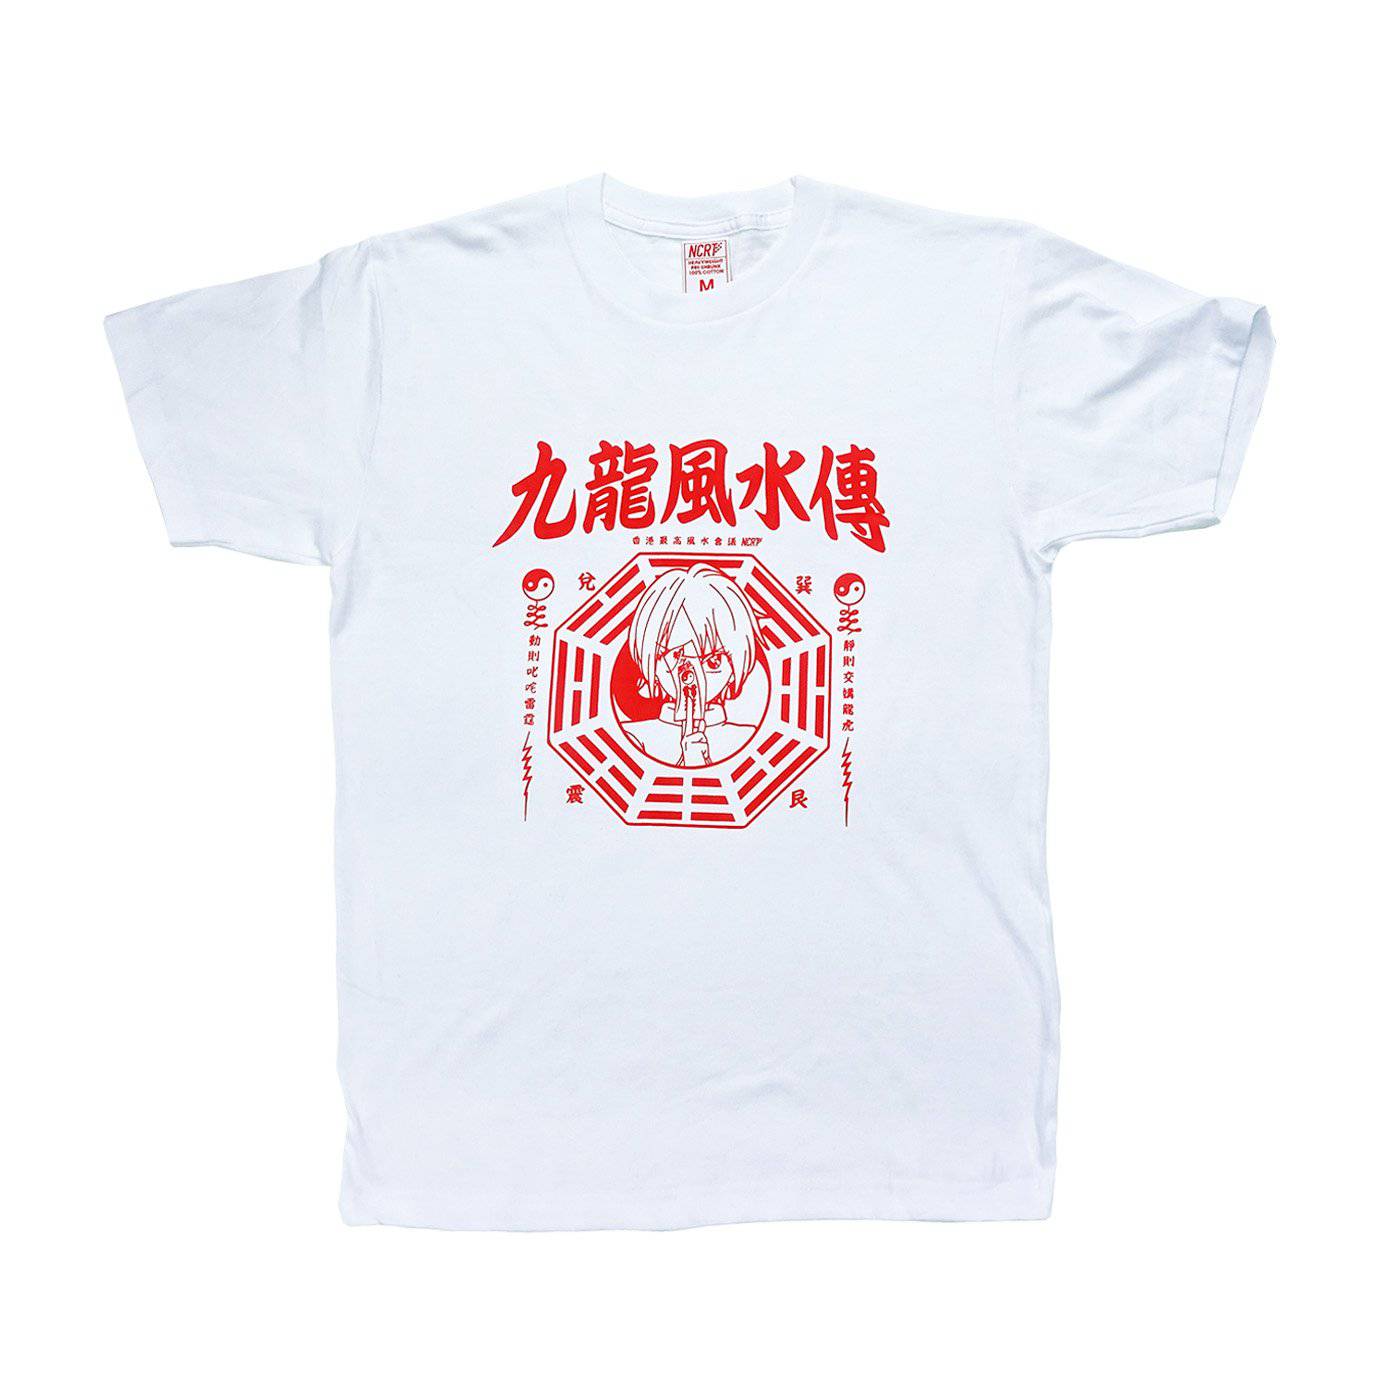 Fengshui Council T-Shirt (White) - NCRT